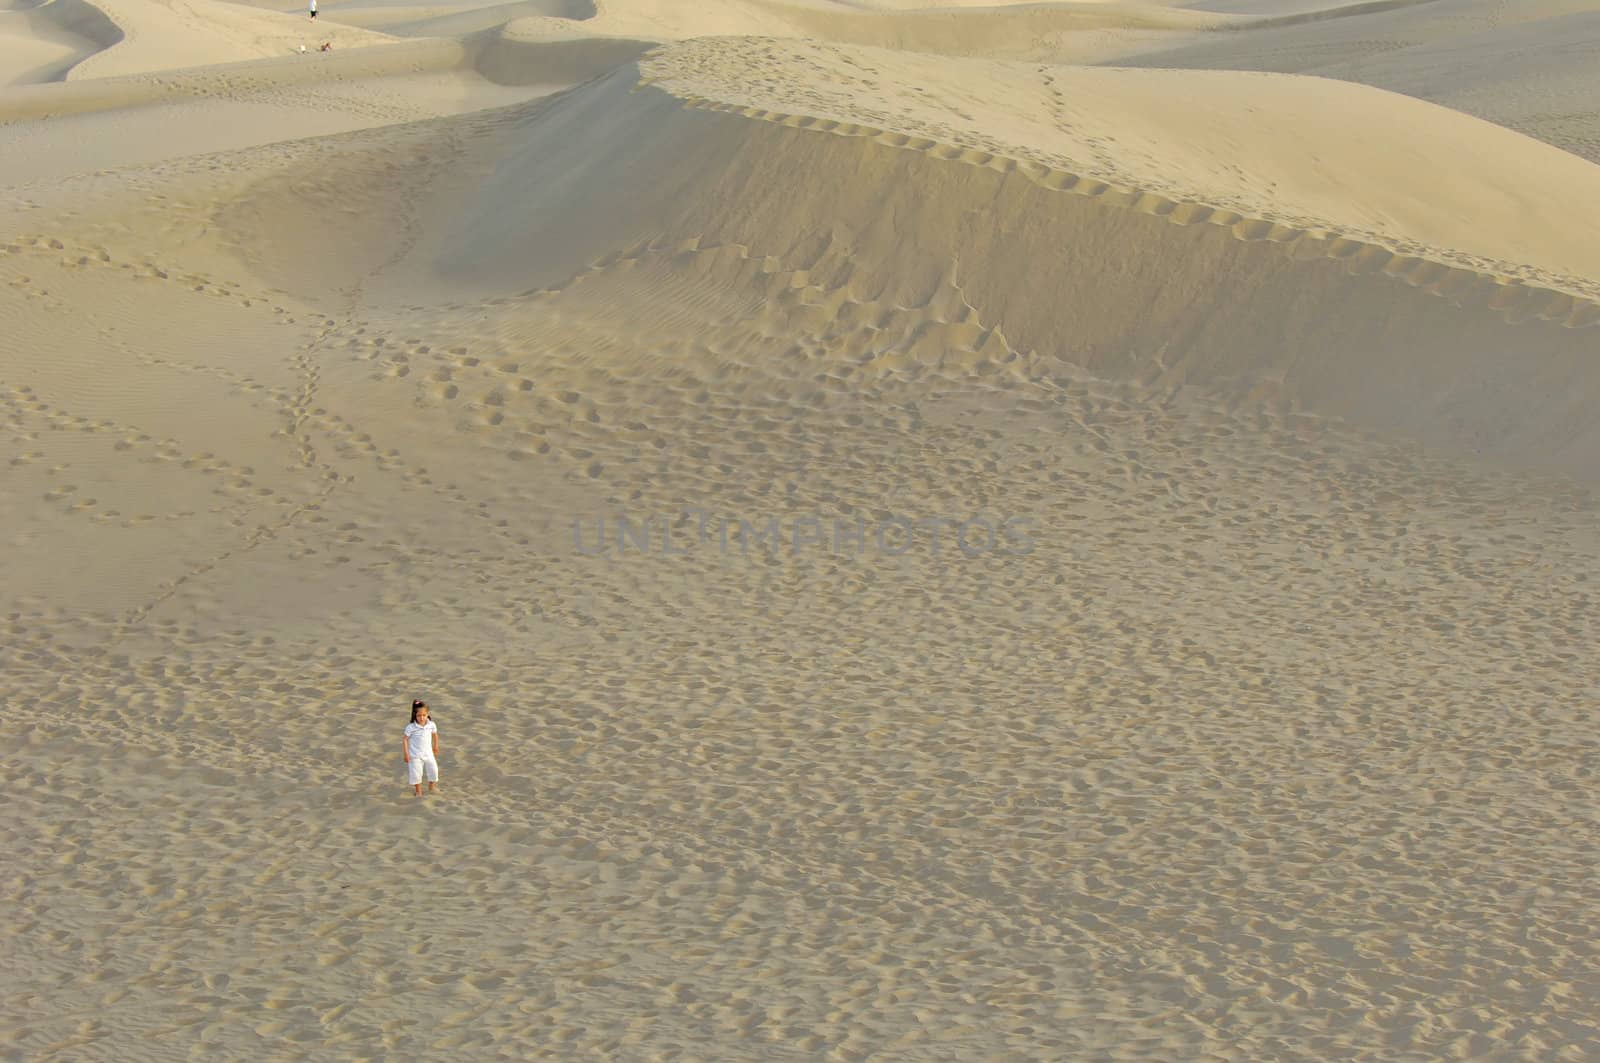 Child is all alone in a desert